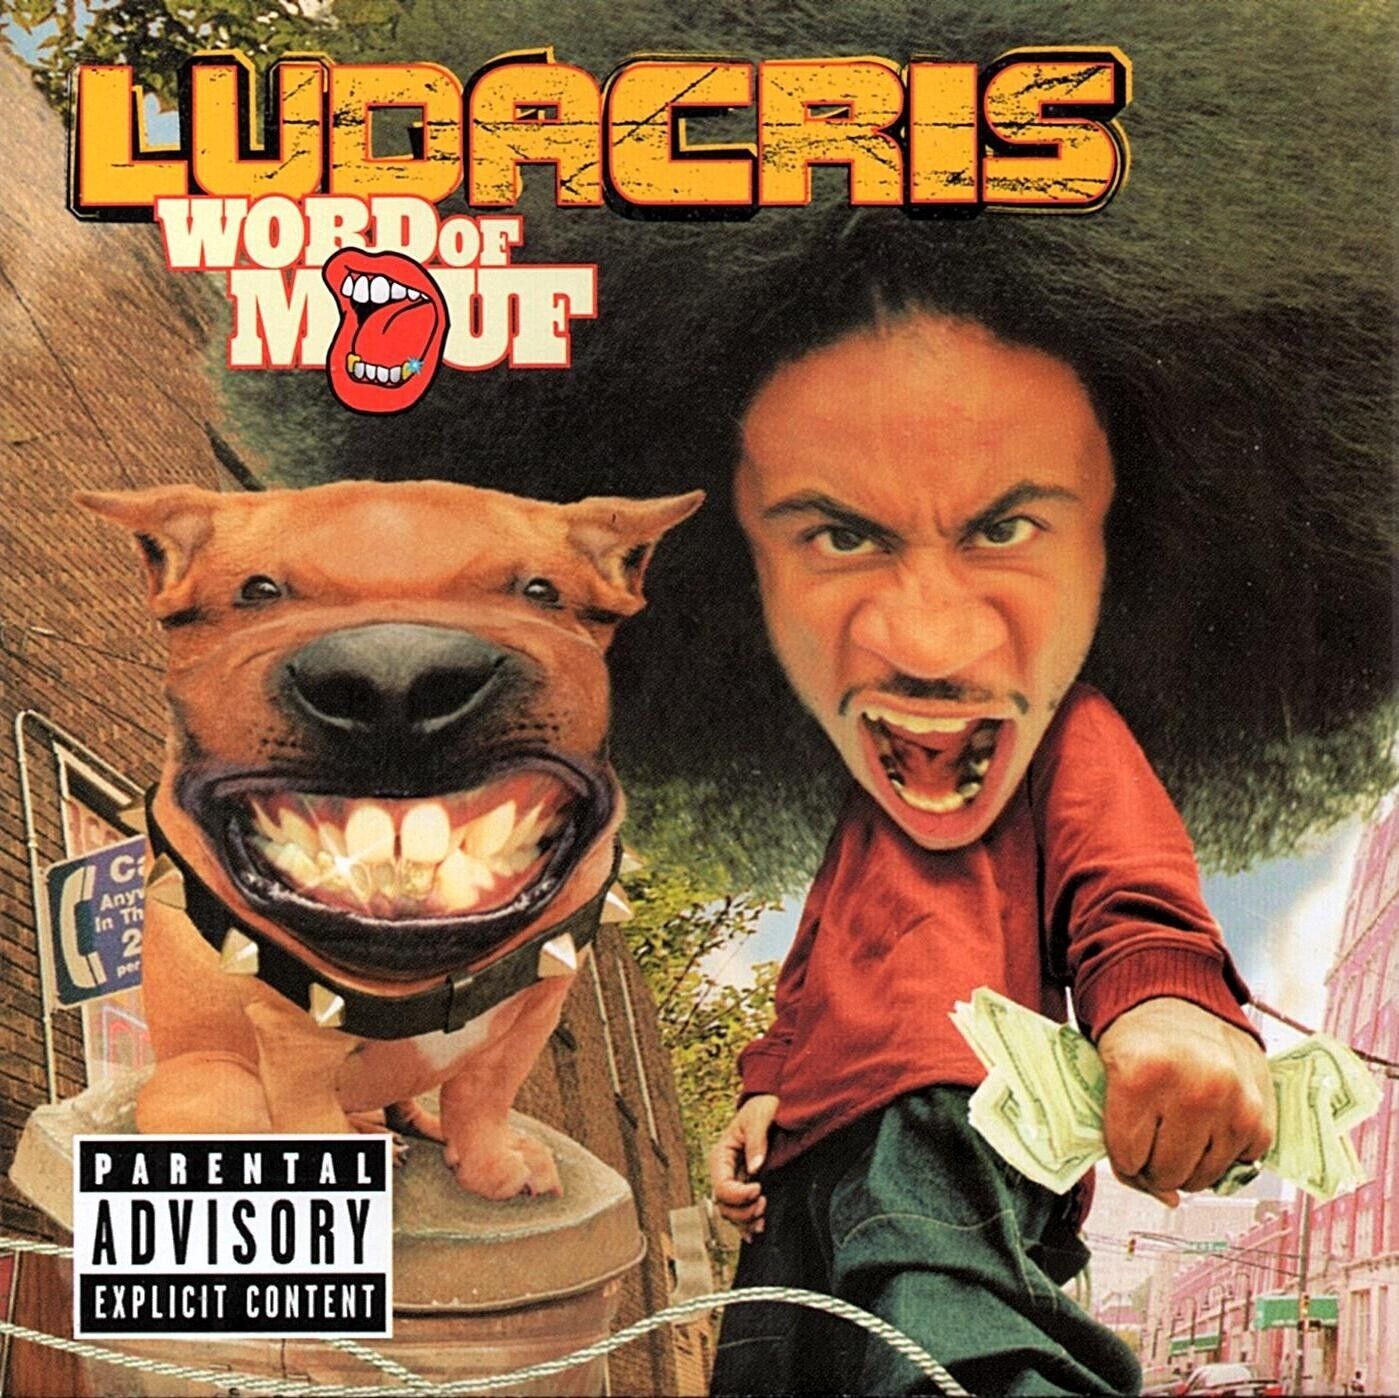 Word of Mouf by Ludacris (CD, 2001)